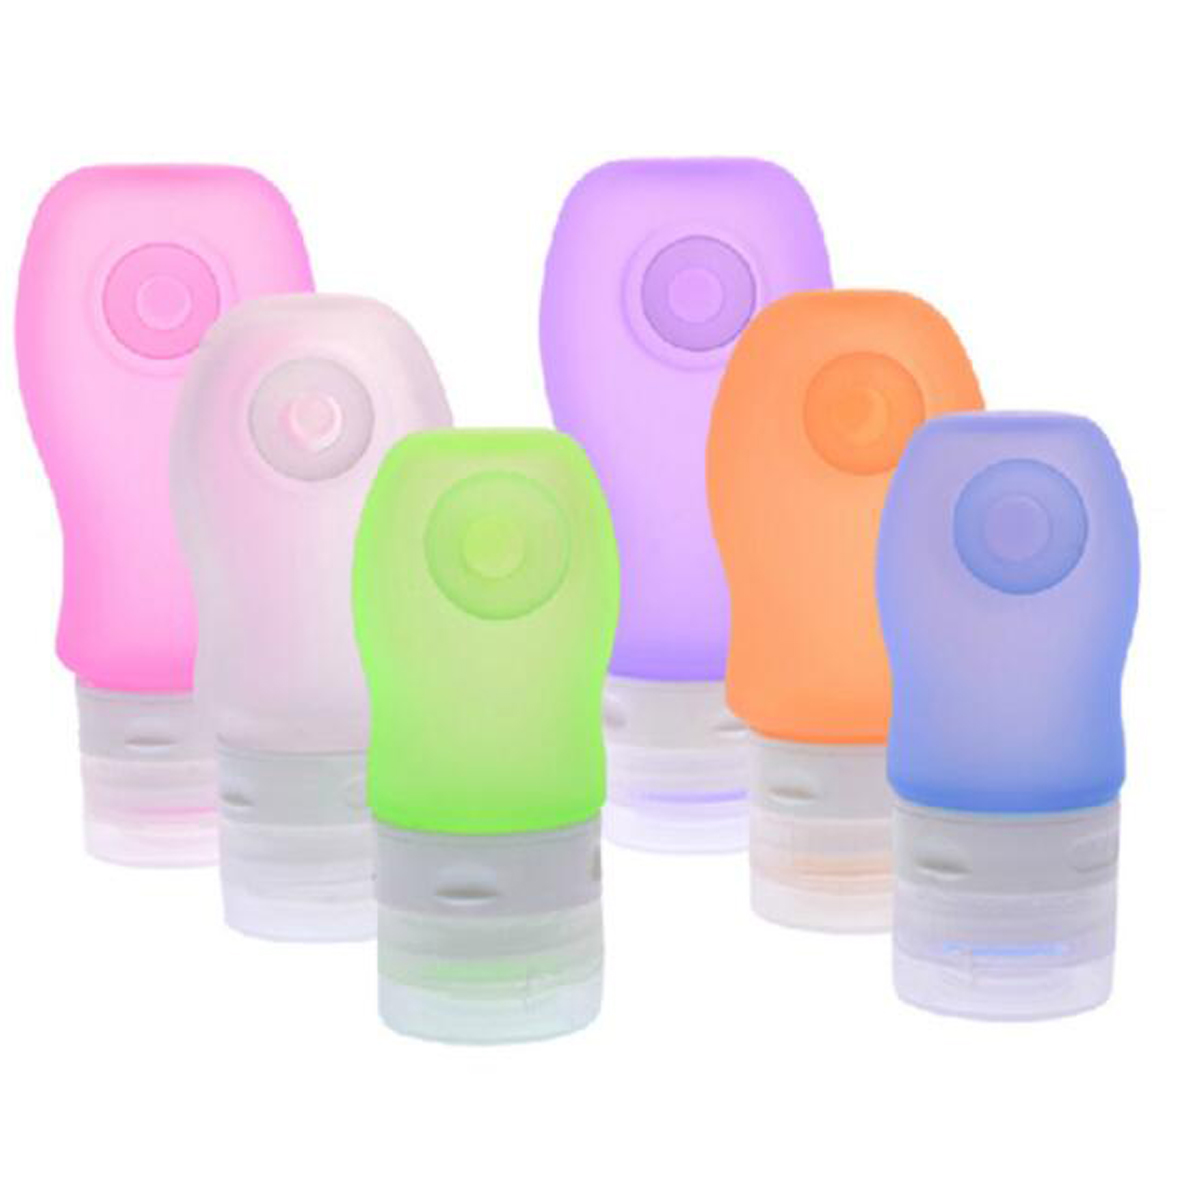 GL-ELY1194 90ml(3oz) Portable Airline Leak-proof Silicone Travel Bottle